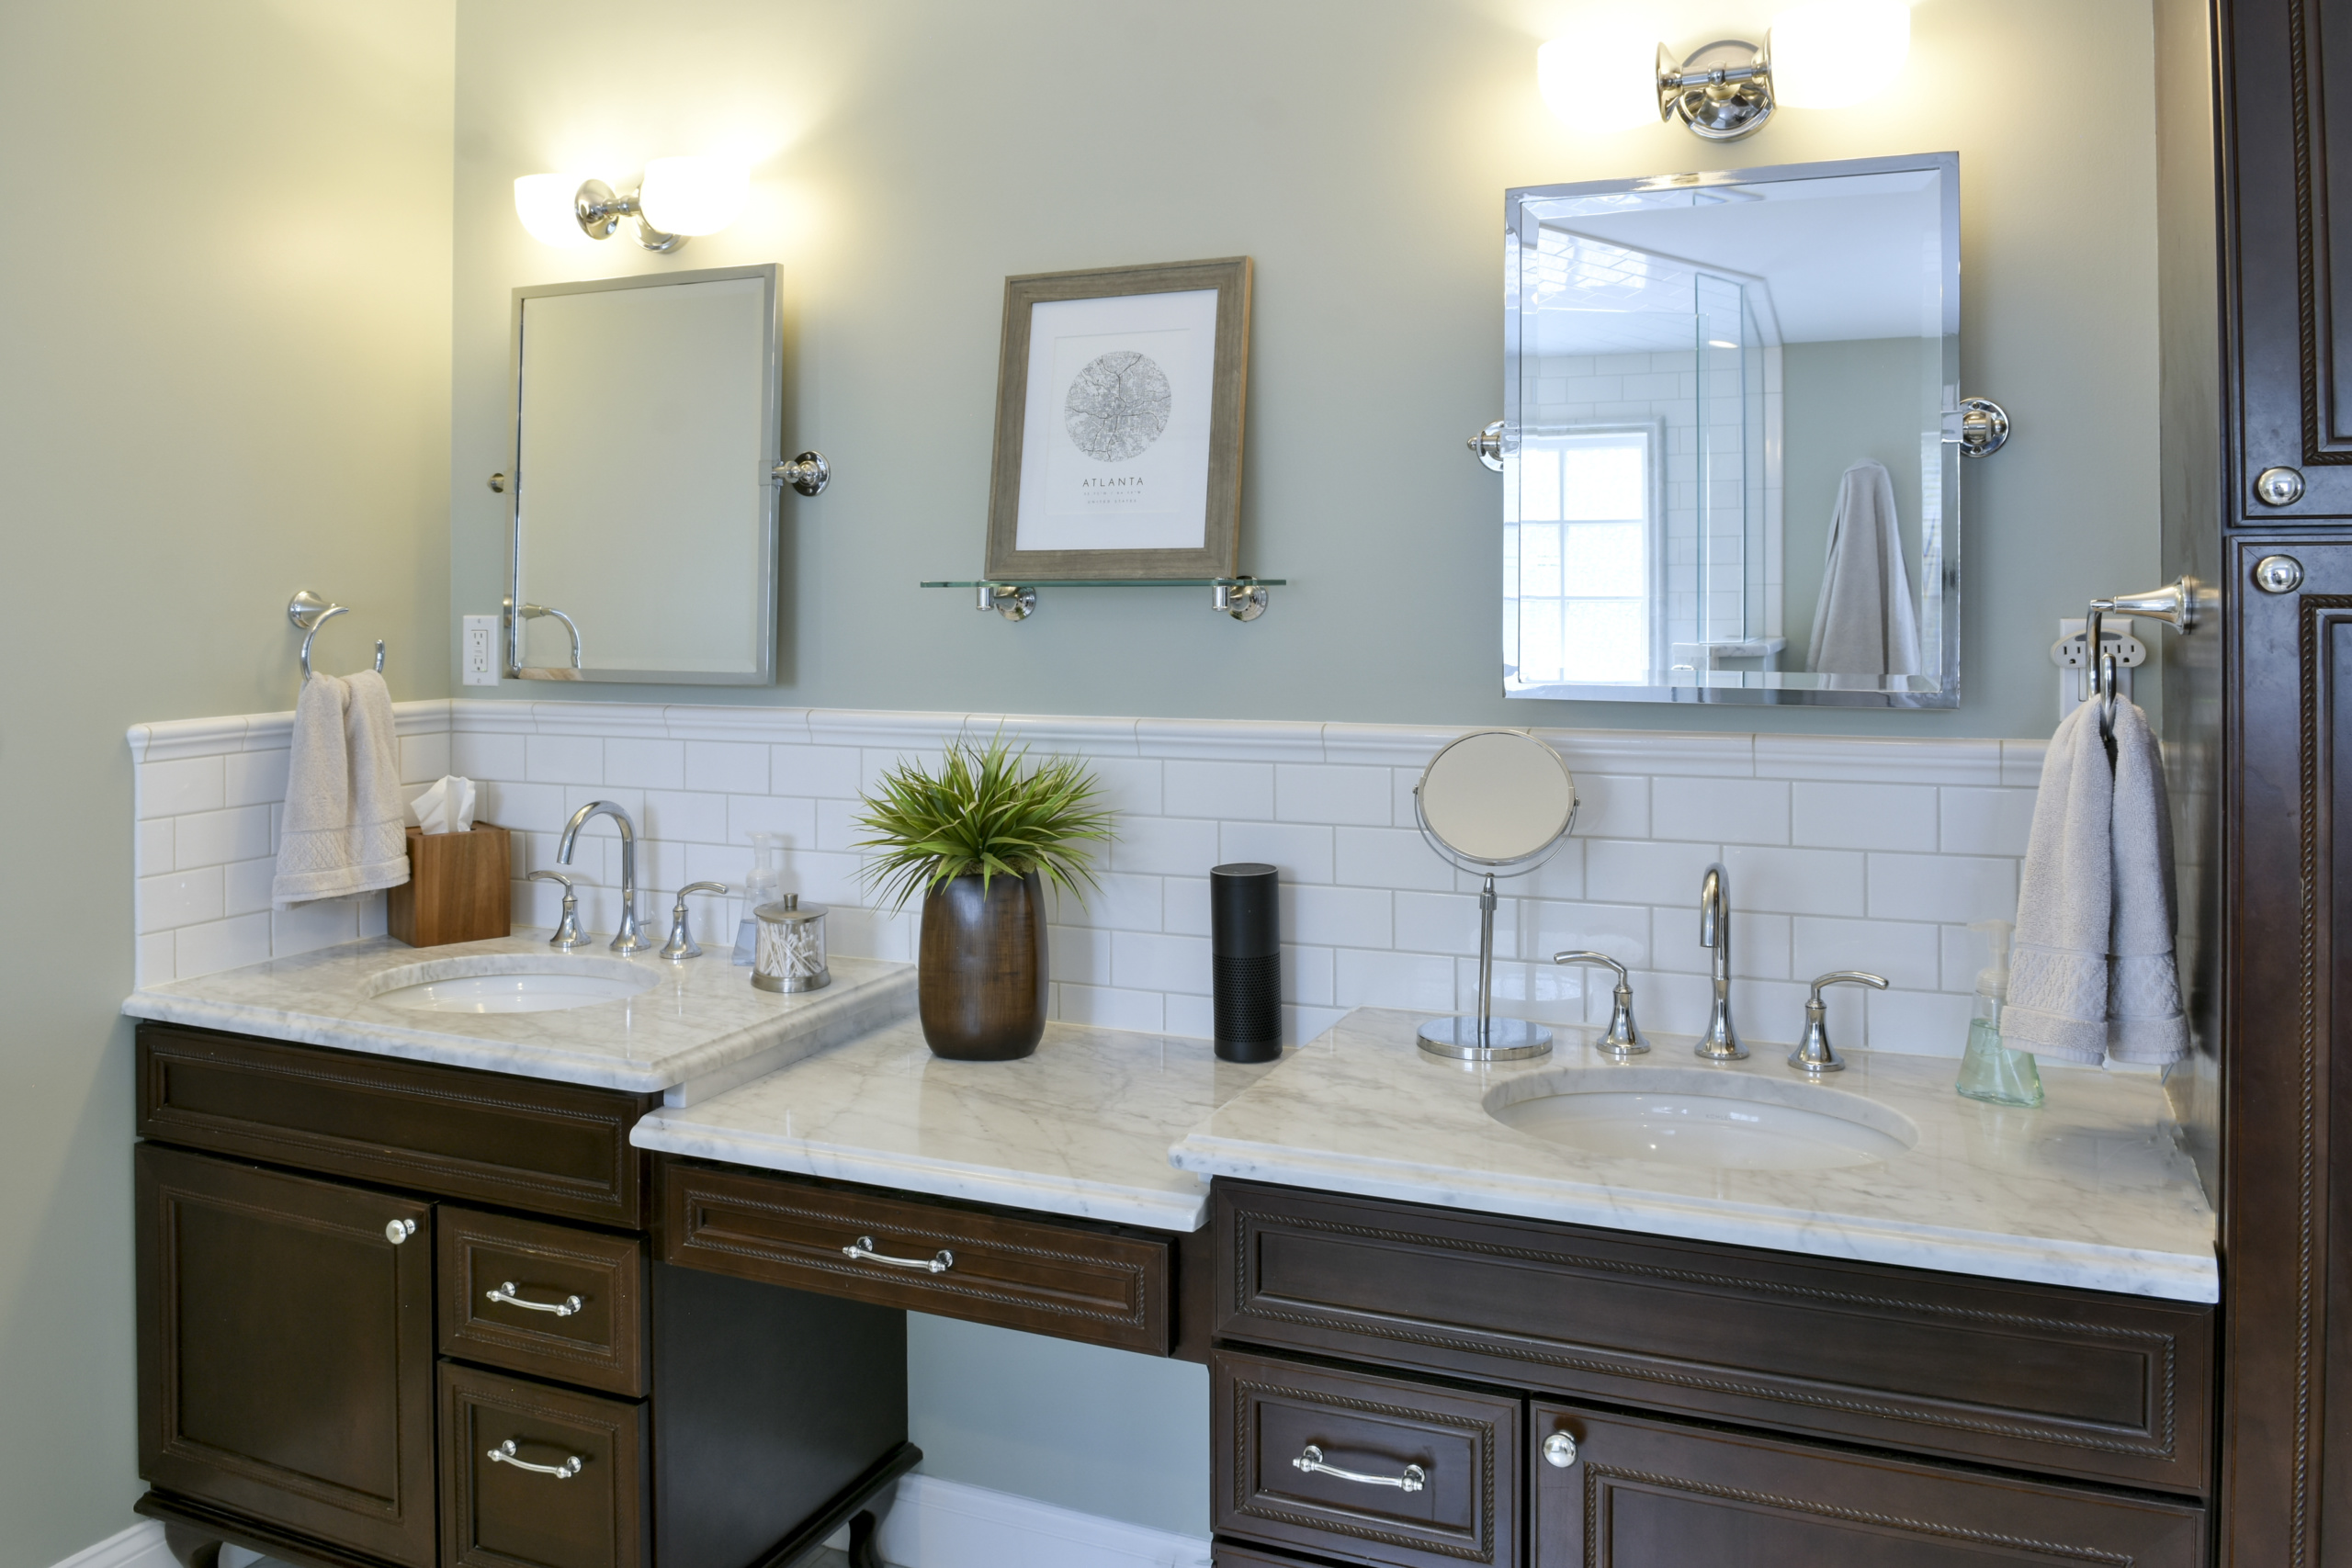 Ben Moore Comfort Grey wall paint, double sink vanity, chrome faucets, white subway tile, round sinks, espresso vanity,